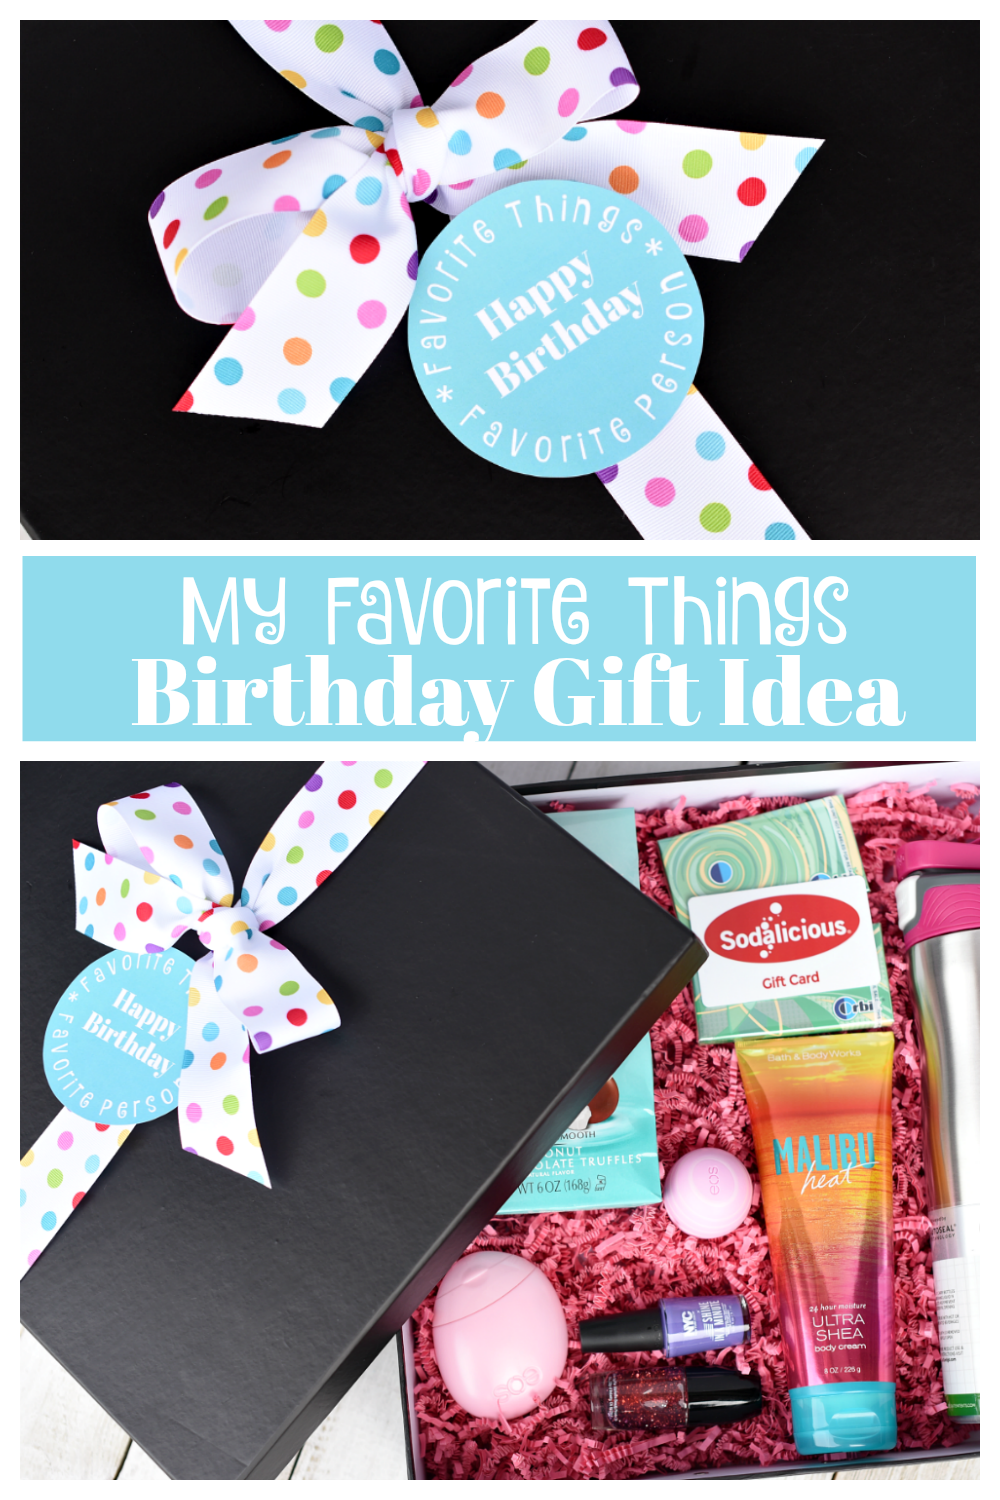 Favorite Things Gift Ideas Under $25